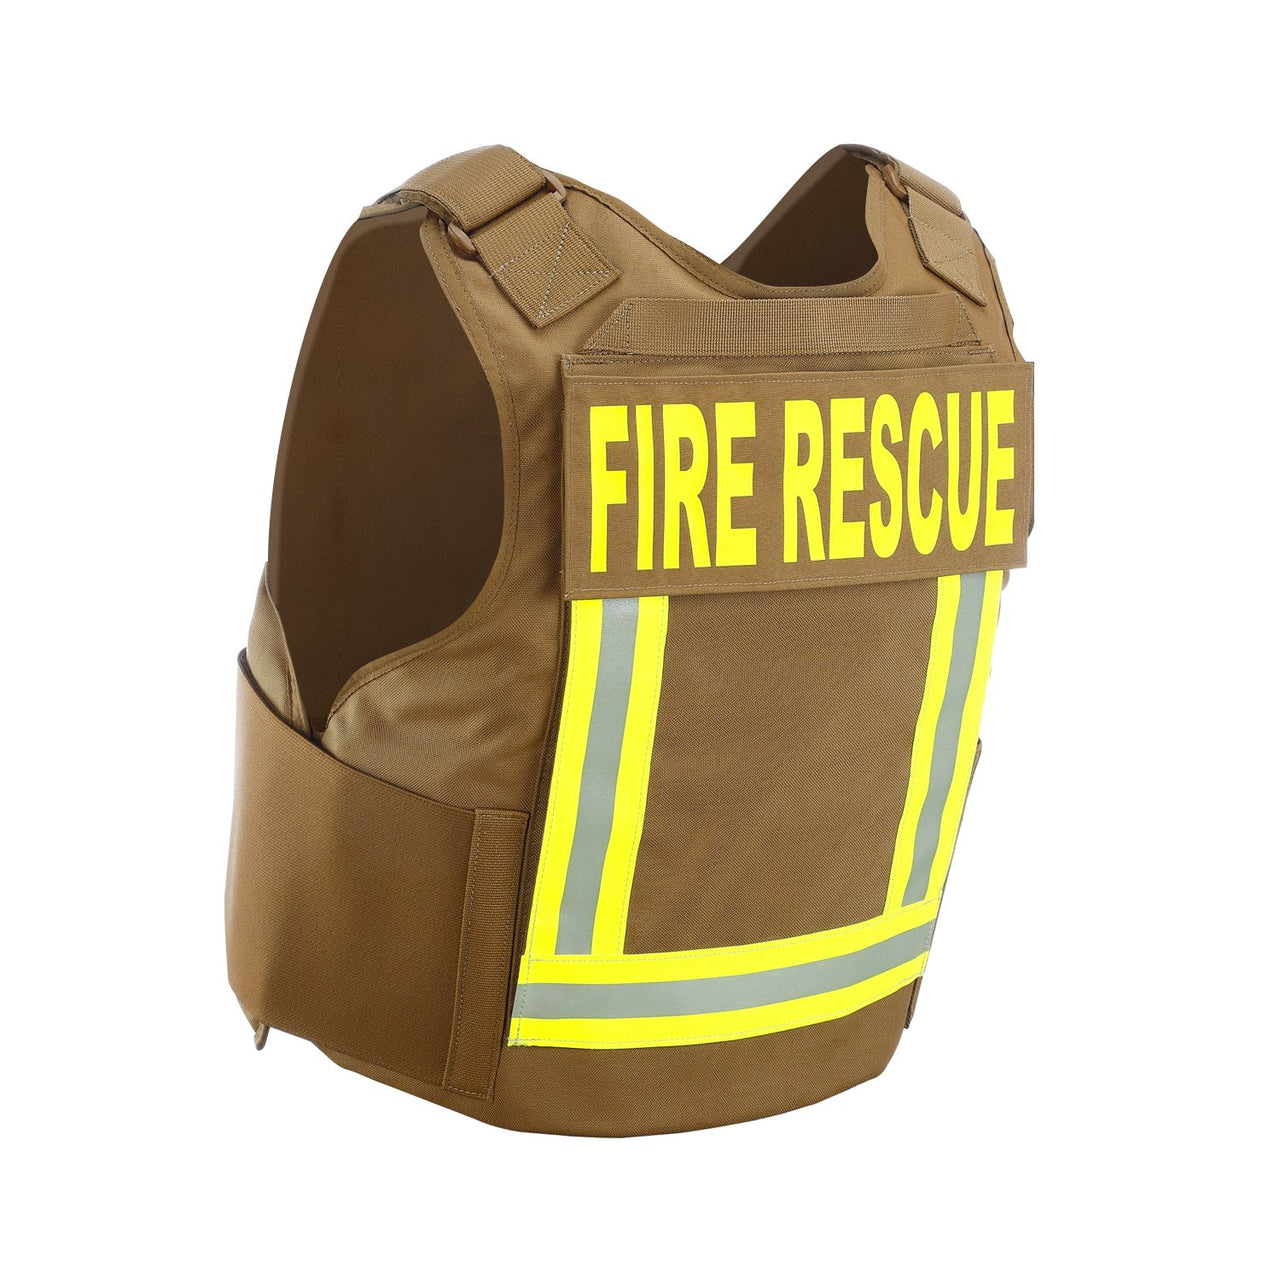 A Body Armor Direct Fireman Tactical Multi-Threat Vest on a white background.